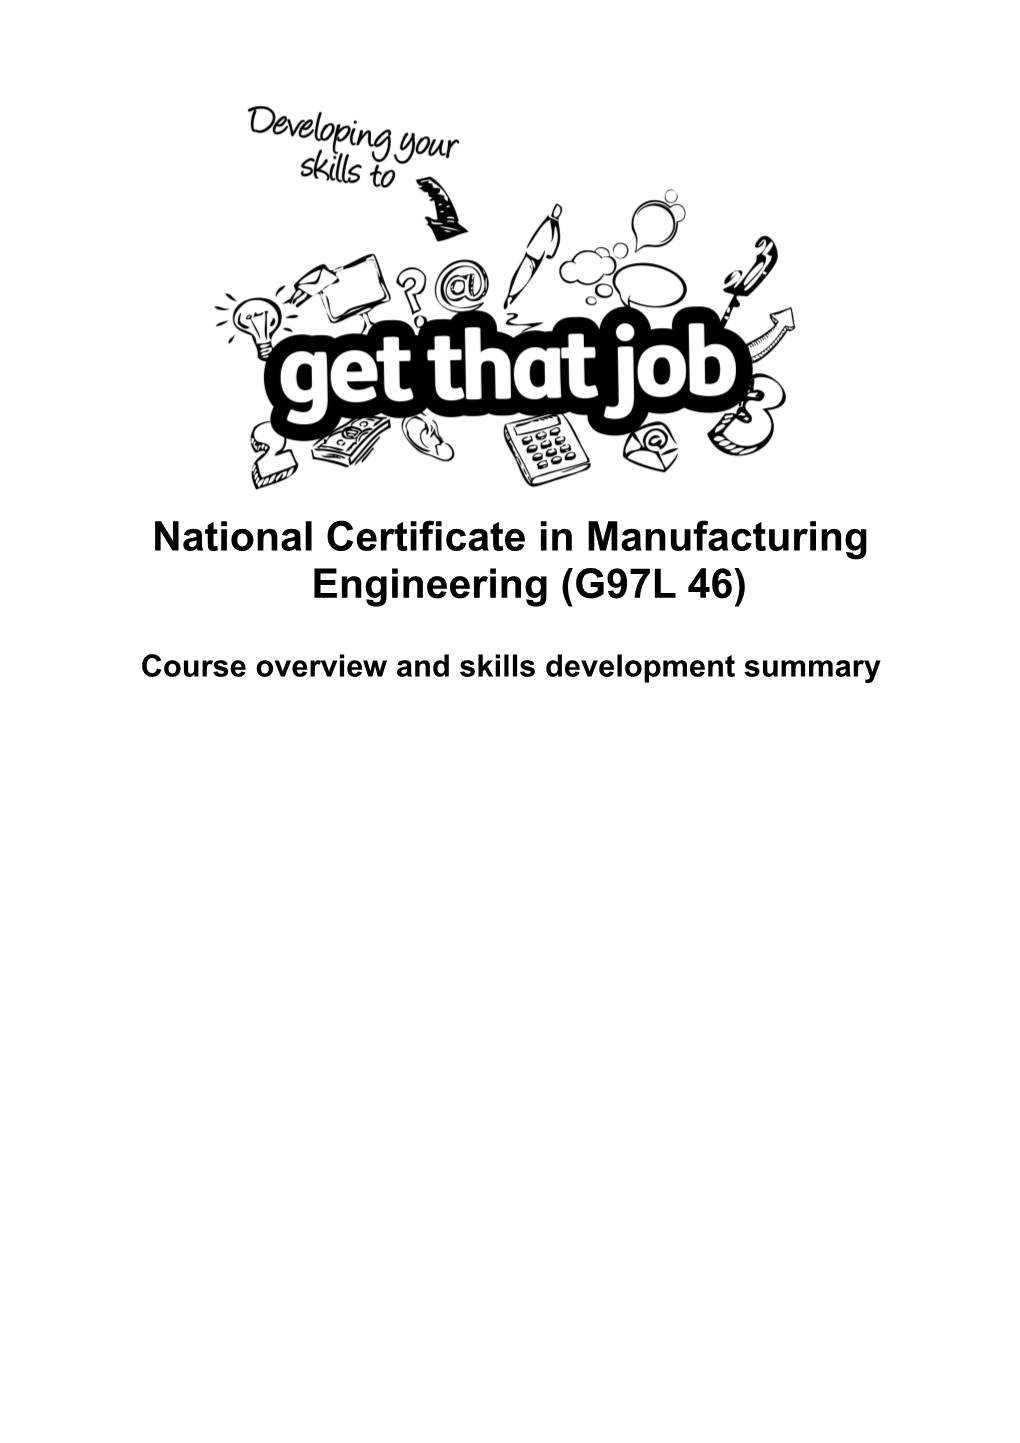 National Certificate in Manufacturing Engineering(G97L 46)